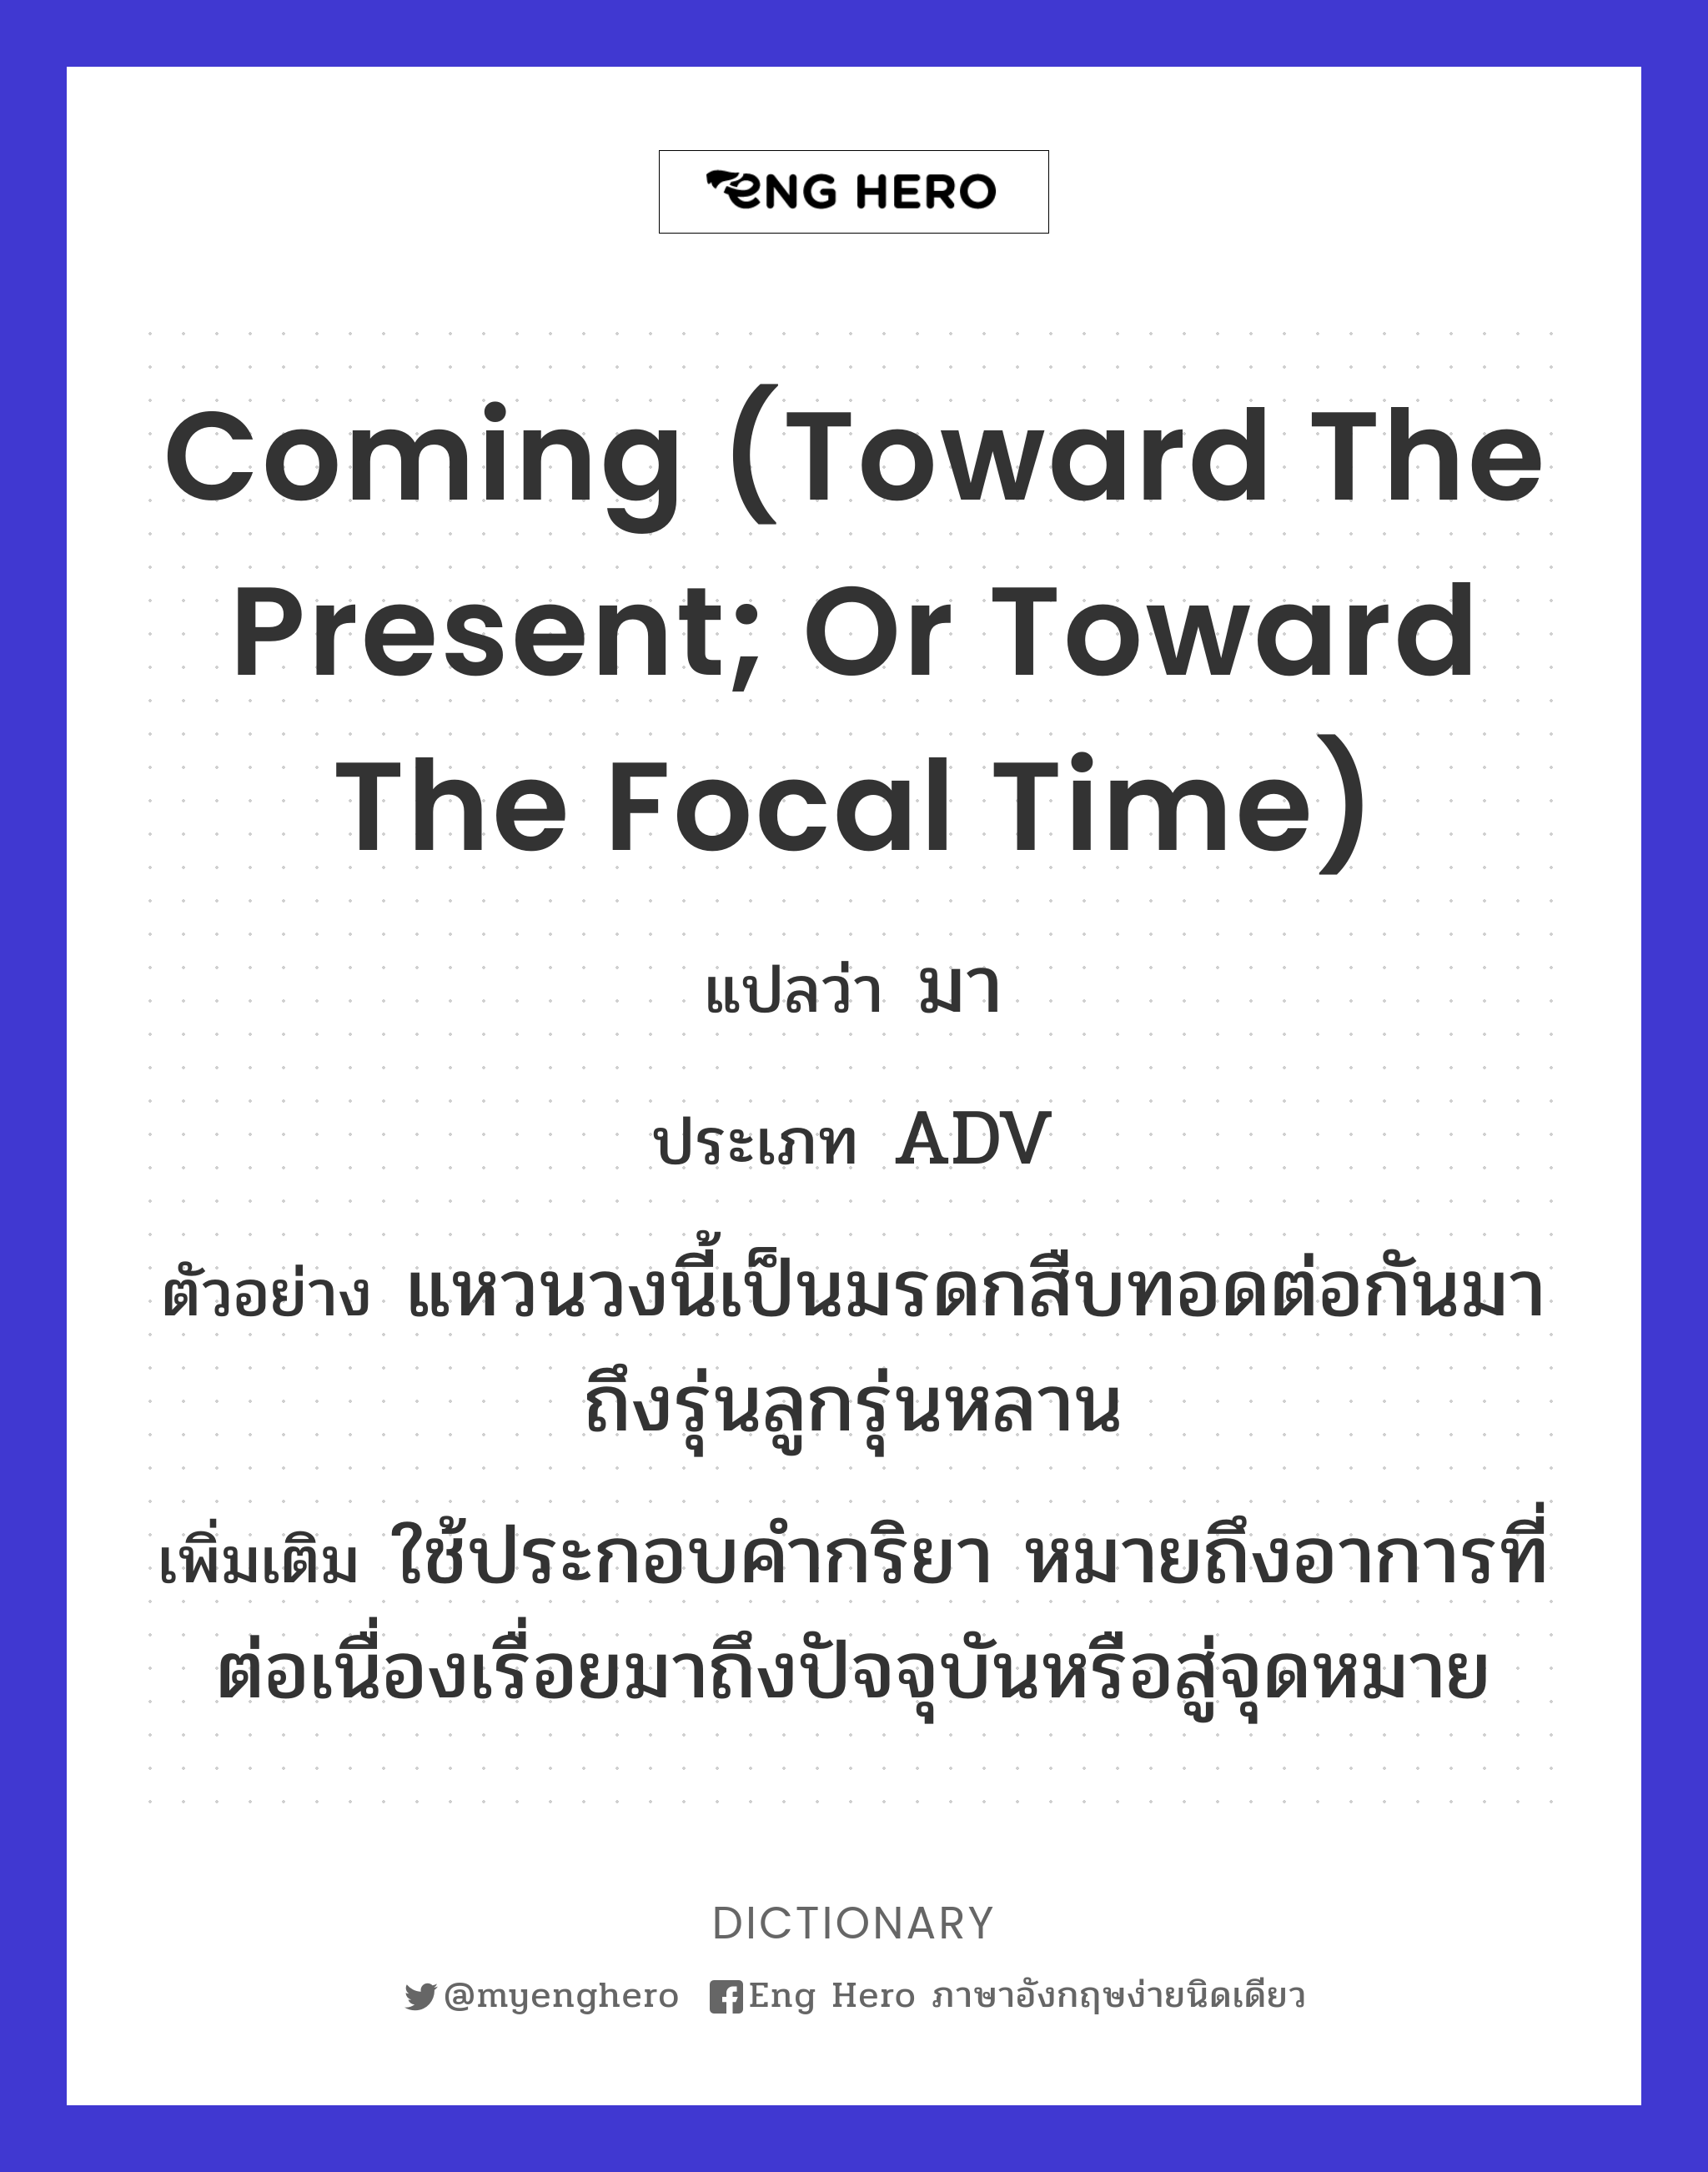 coming (toward the present; or toward the focal time)